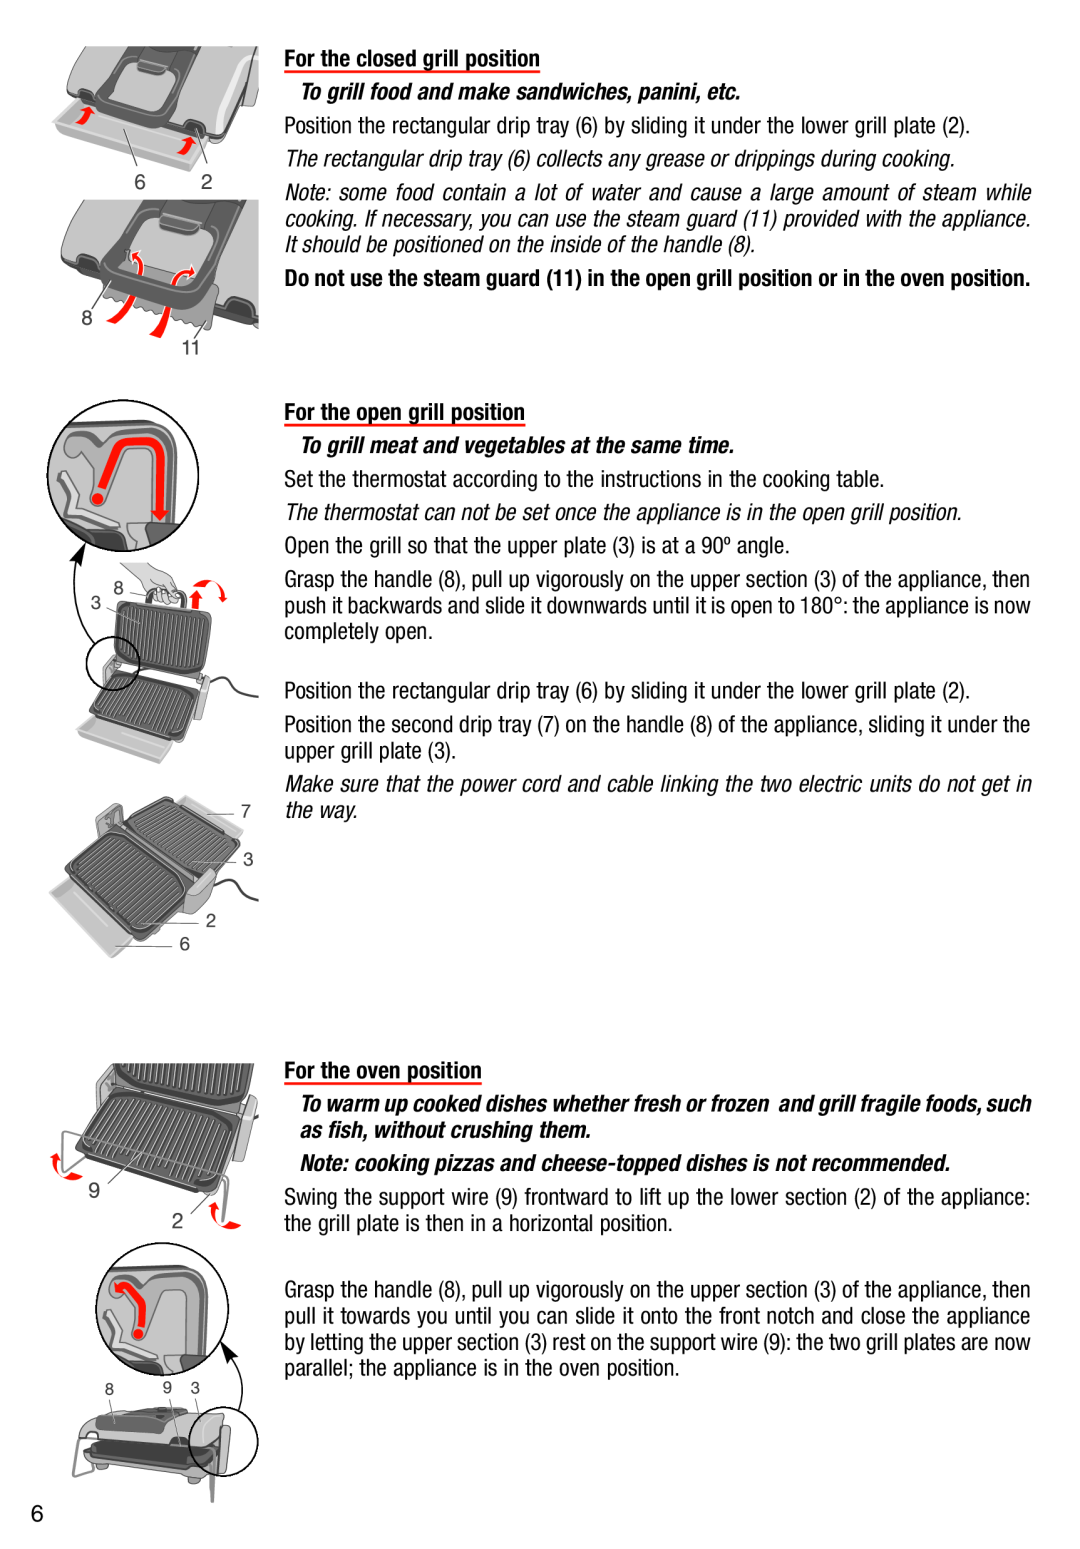 T-Fal Use Grill & Panini Maker manual For the closed grill position, To grill food and make sandwiches, panini, etc 